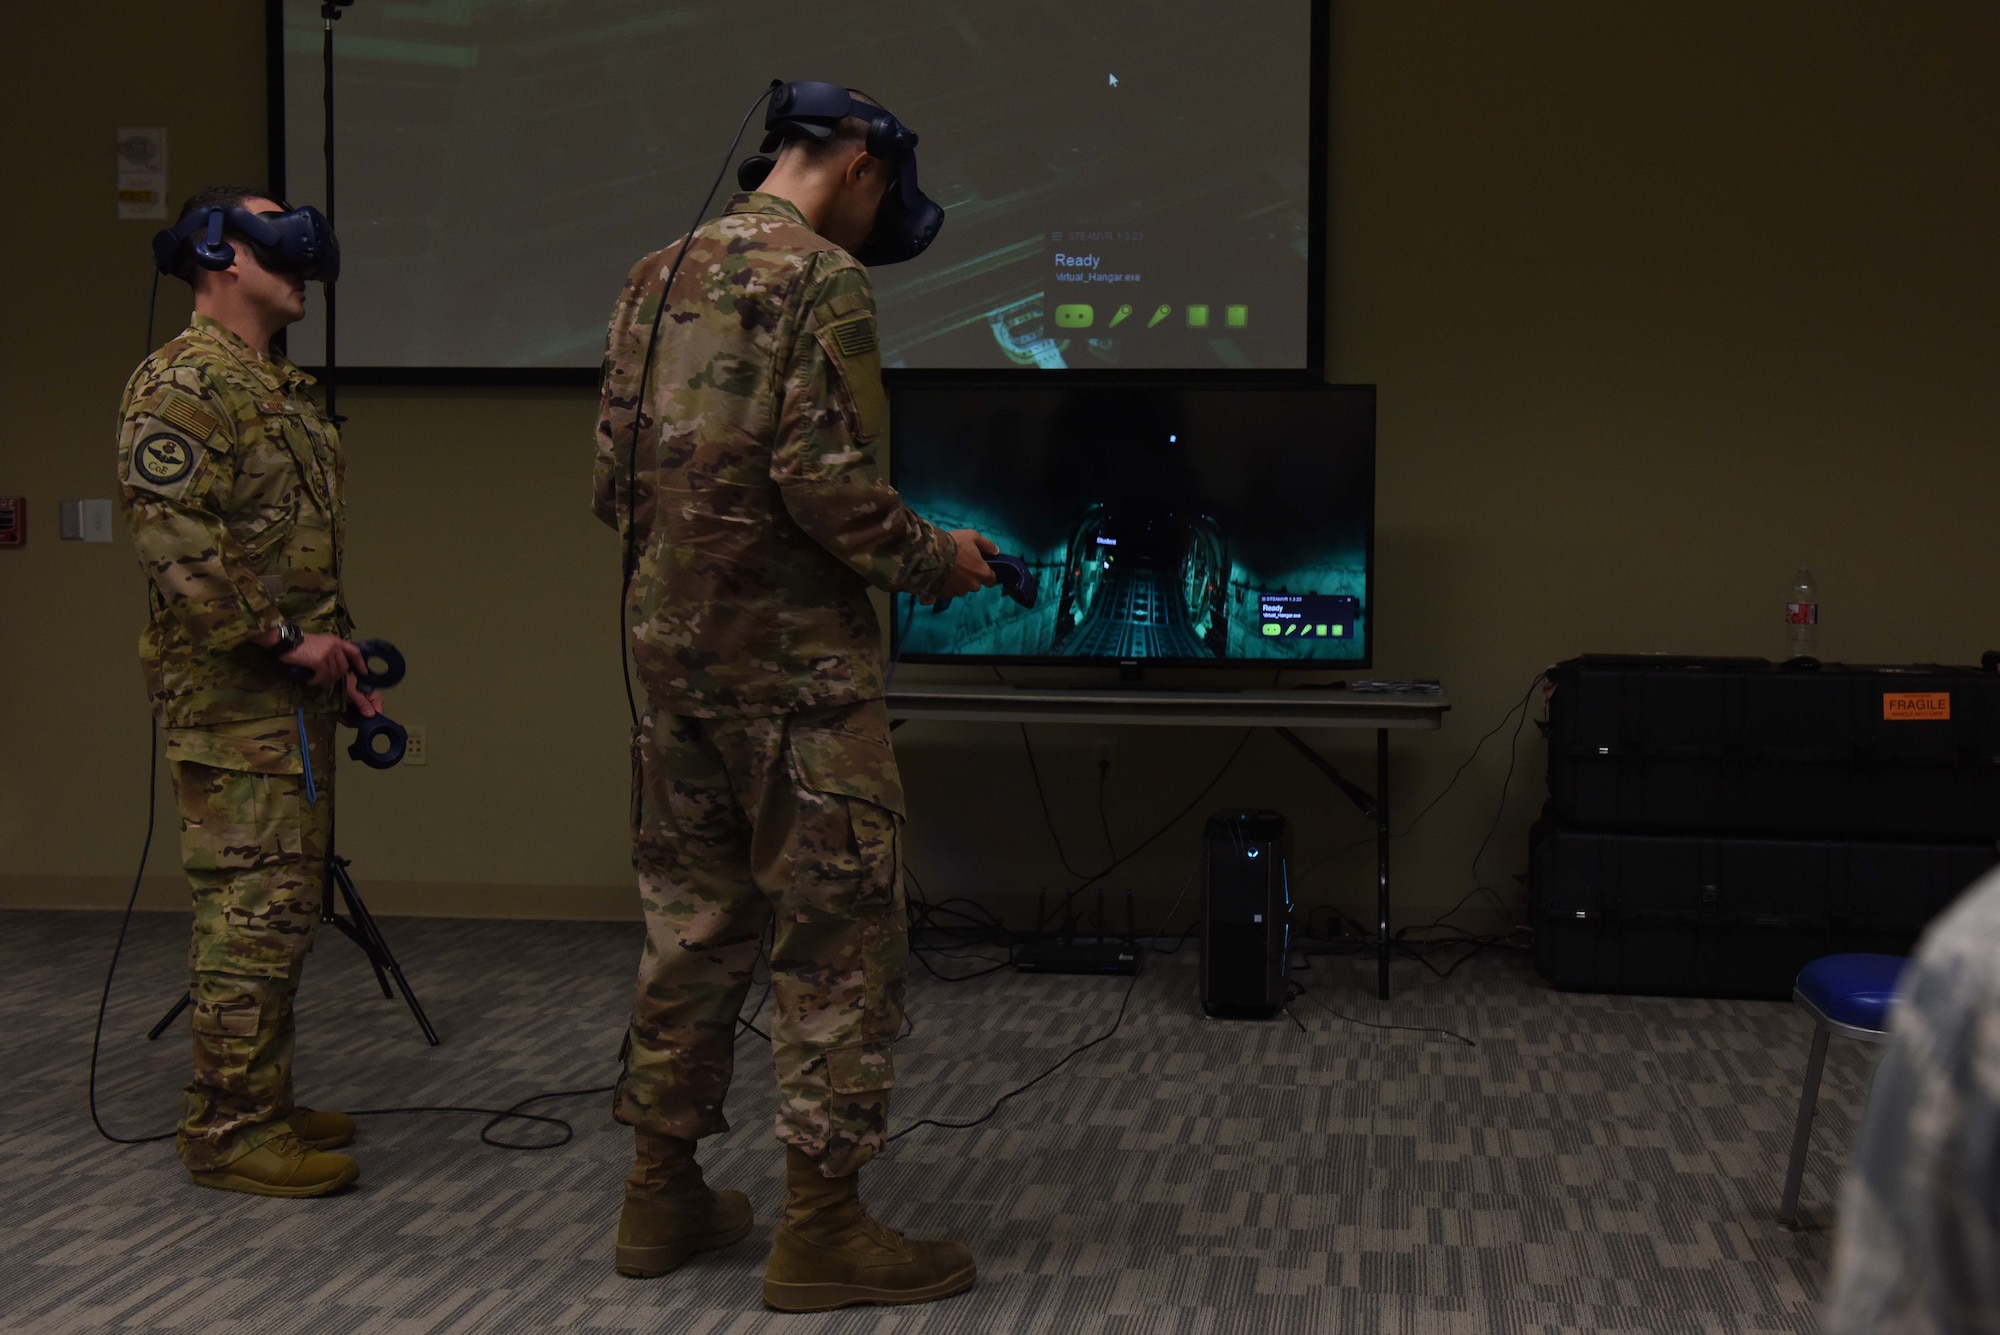 Two Airmen wearing occupational camouflage pattern uniform stand in front of a projector while using virtual reality gear